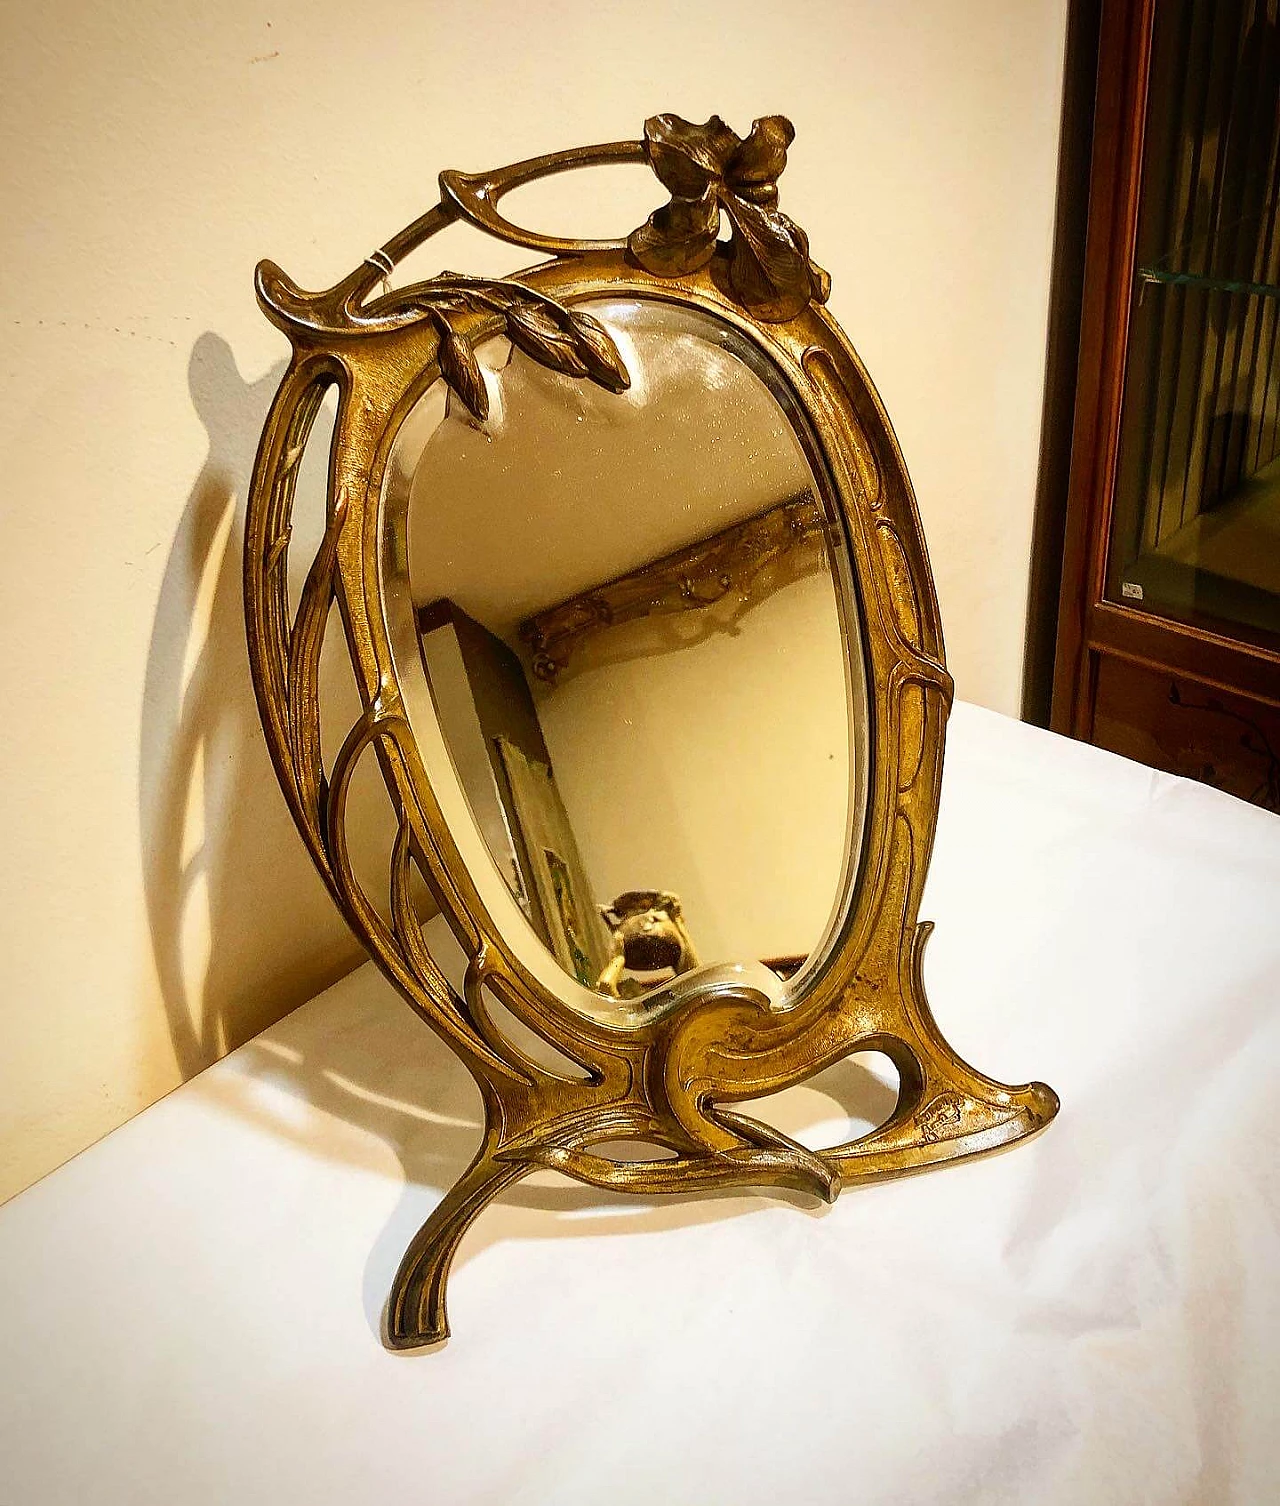 Art Nouveau gilded metal table mirror by Lauseur, early 1900s 1245819